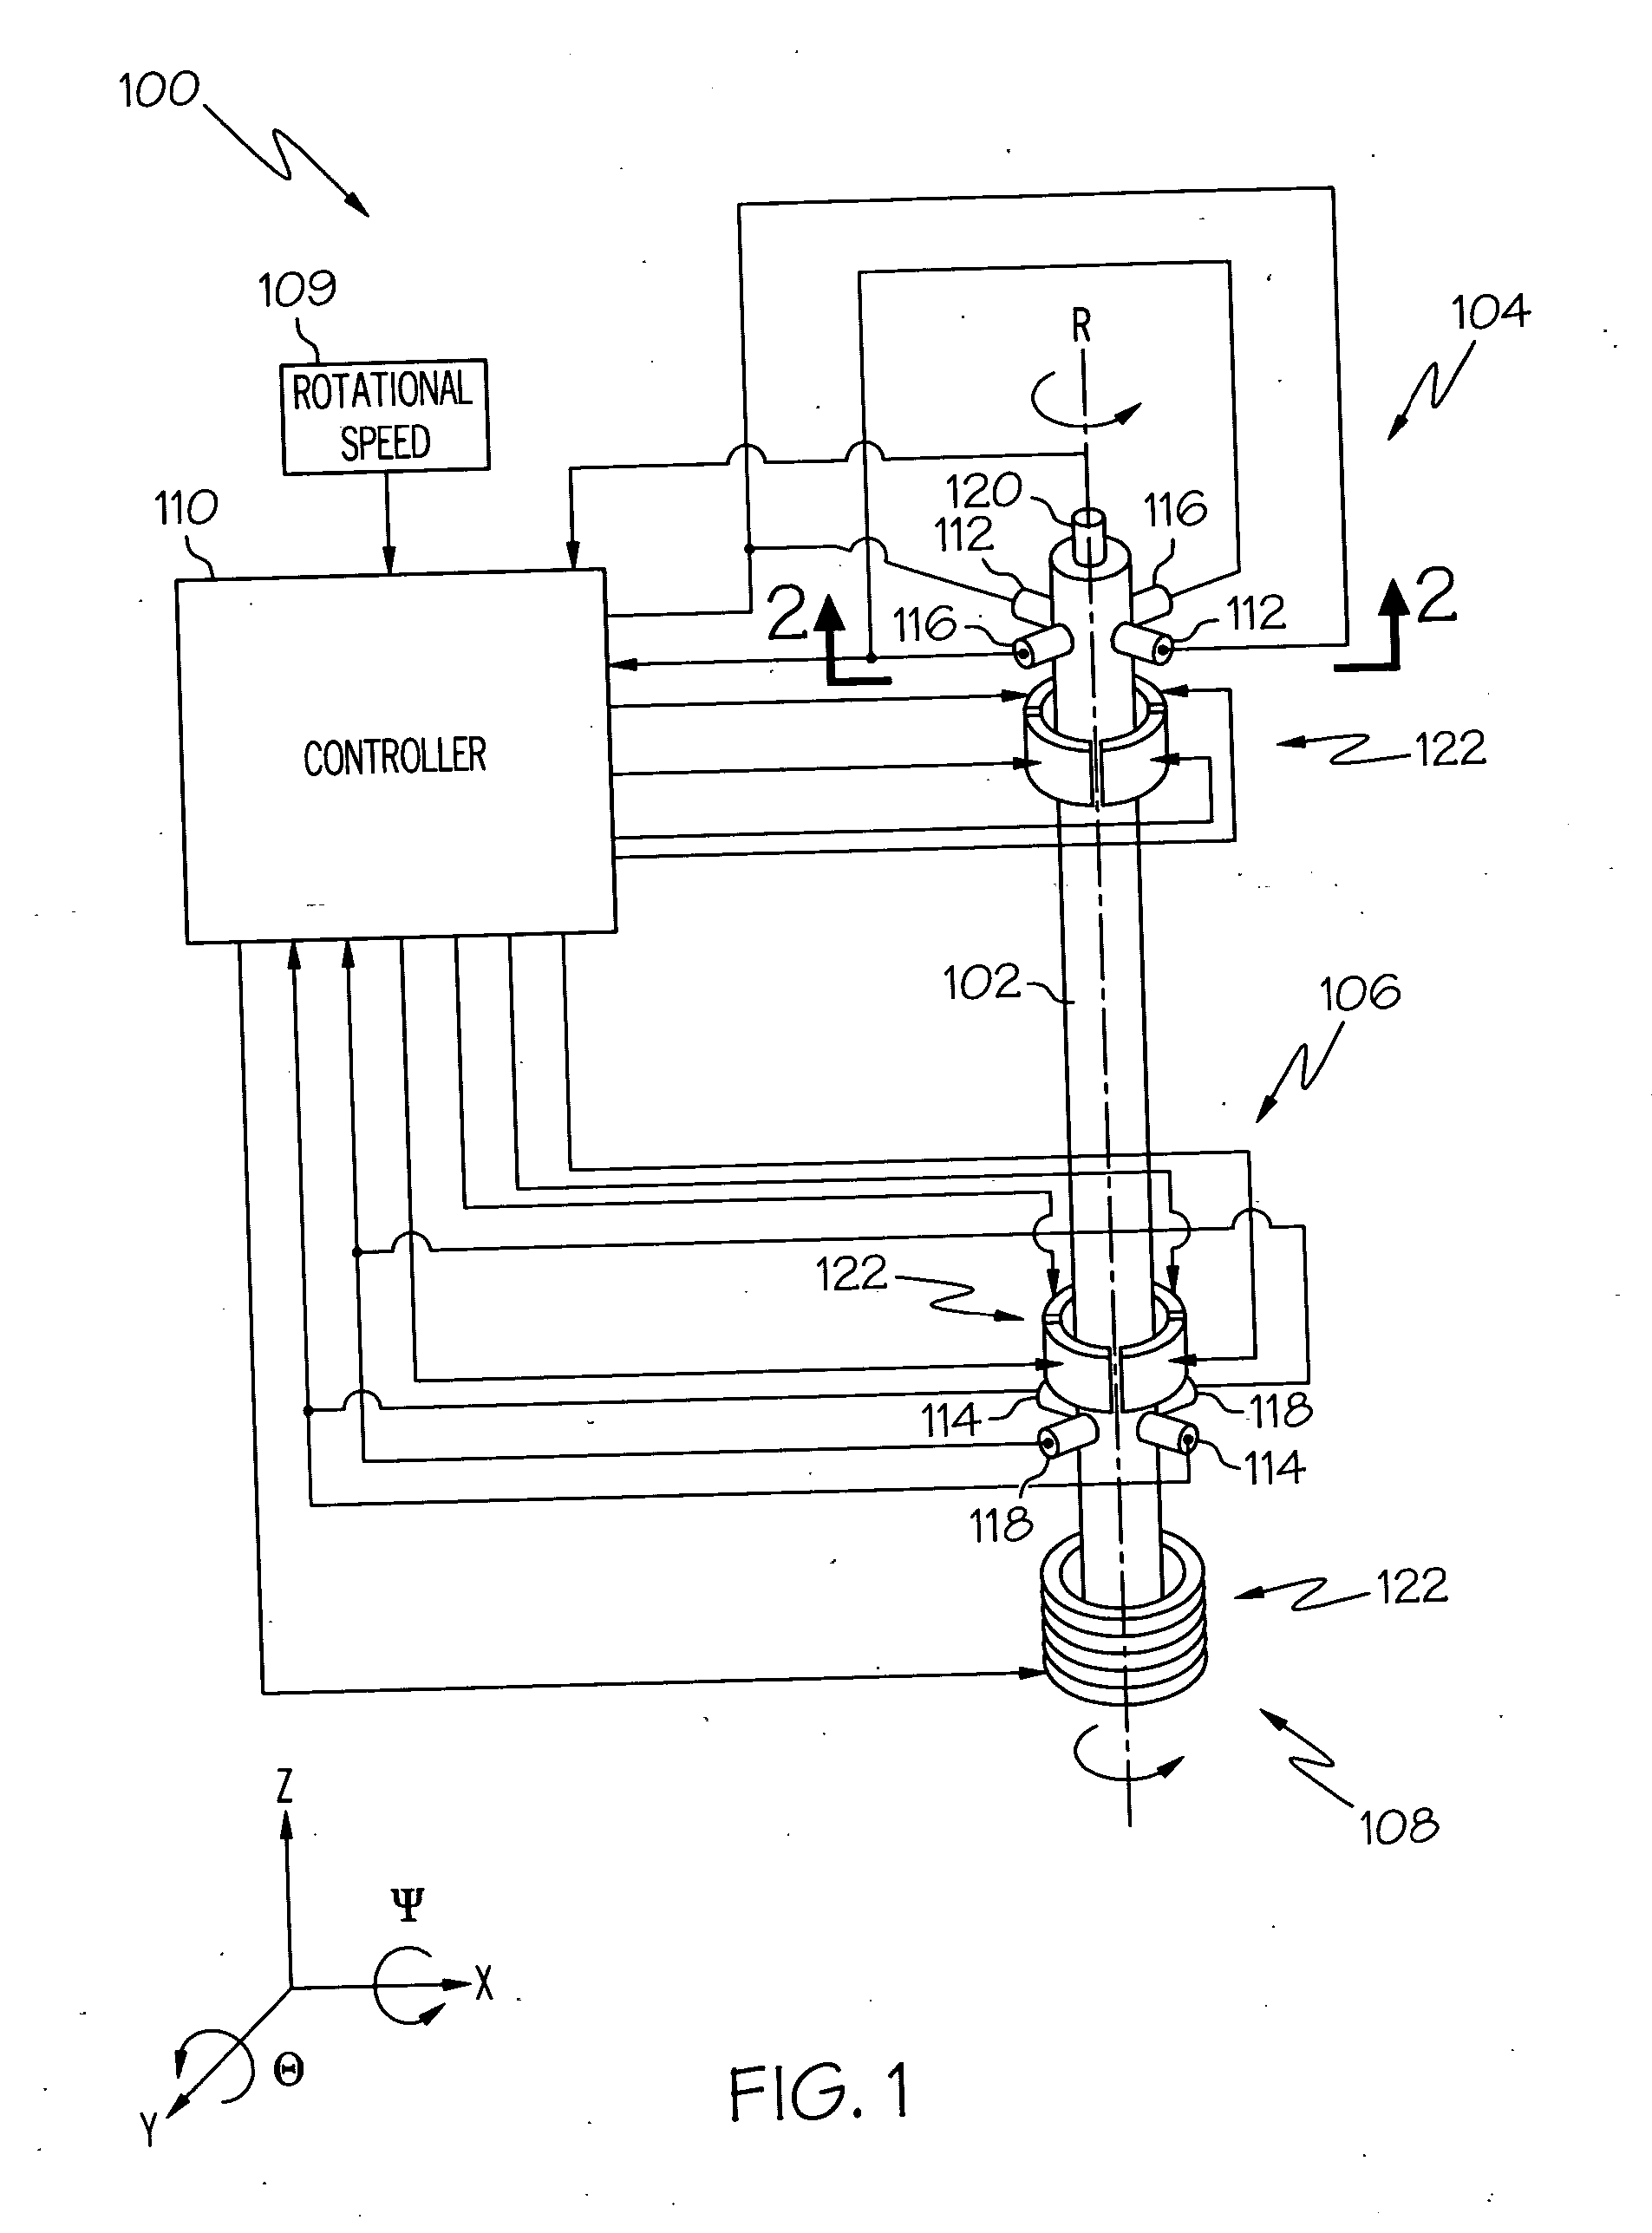 Fault-tolerant magnetic bearing position sensing and control system